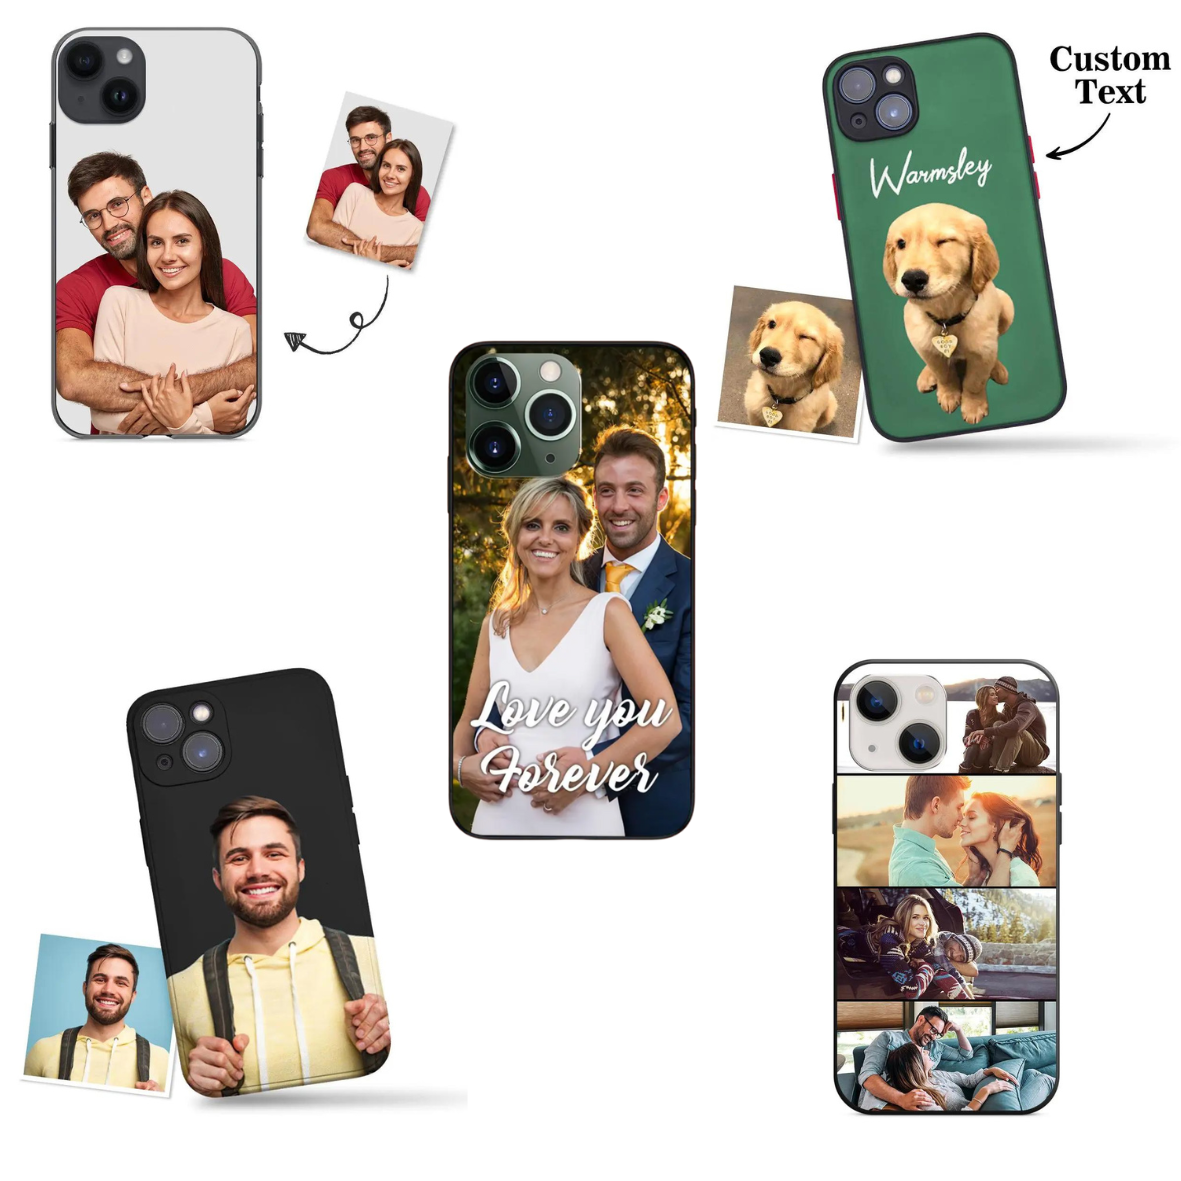 Iphone Case Cover IOS and Airpods